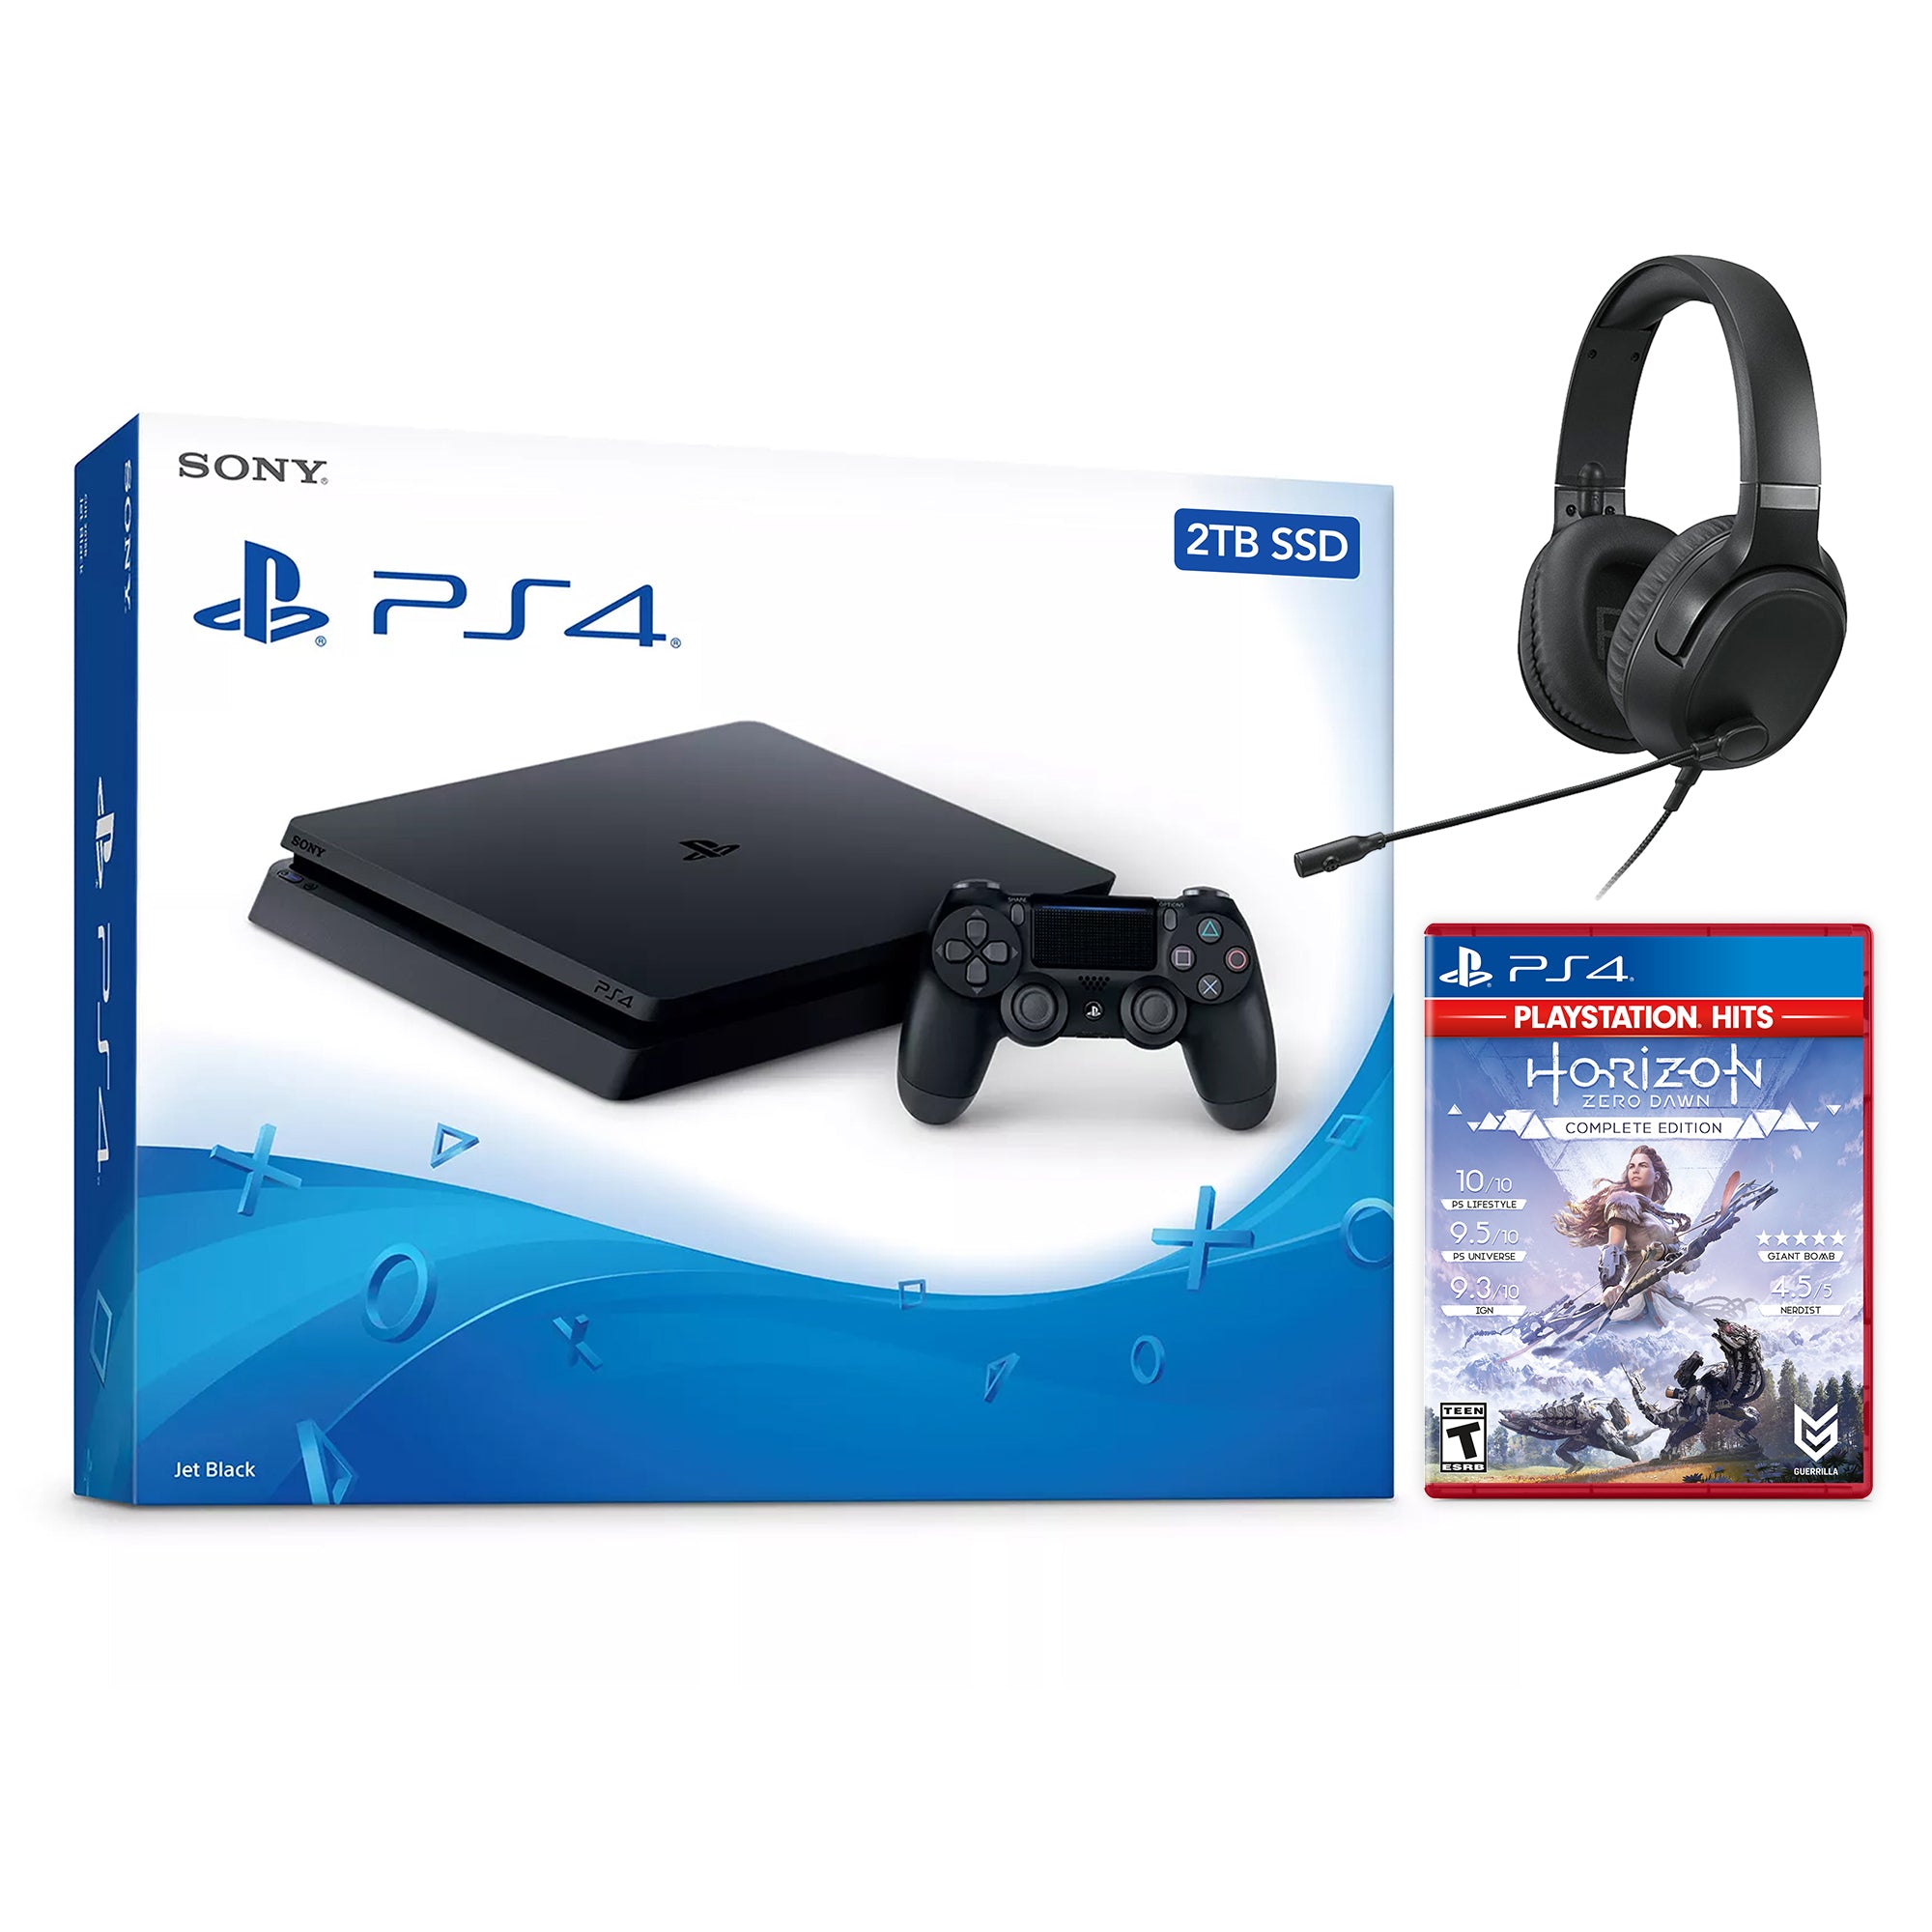 Sony PlayStation 4 Slim Horizon Zero Dawn Bundle Upgrade 2TB SSD PS4 Gaming Console, Jet Black, with Mytrix Chat Headset - 2TB Internal Fast Solid State Drive Enhanced PS4 Console